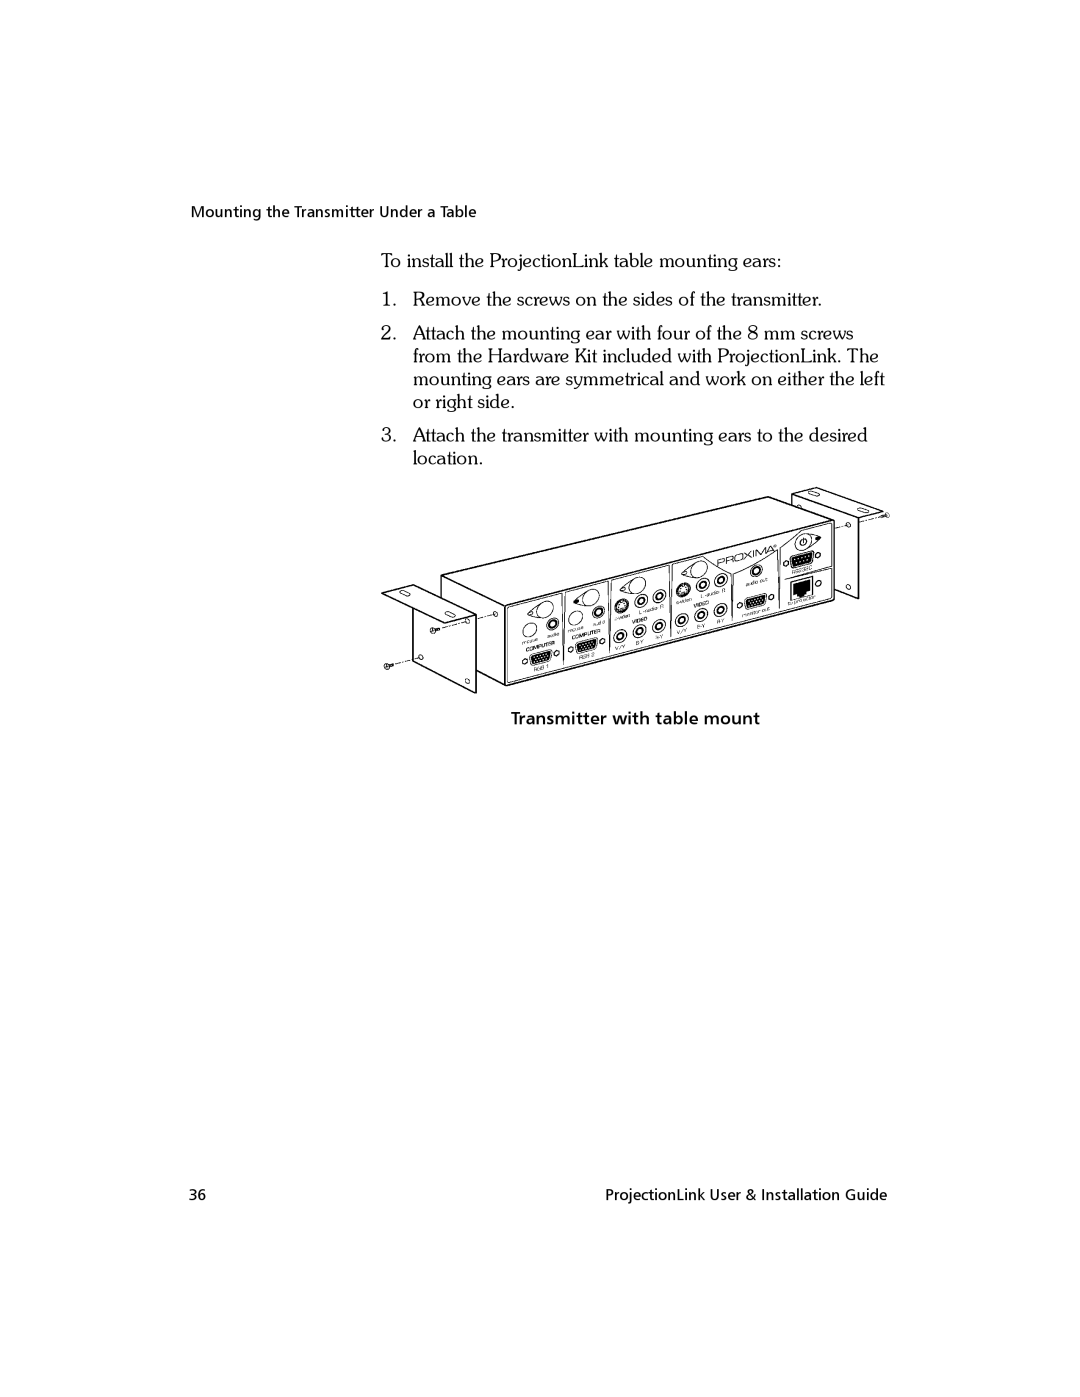 Proxima ASA PL-300E, BNDL-001 manual To install the ProjectionLink table mounting ears 